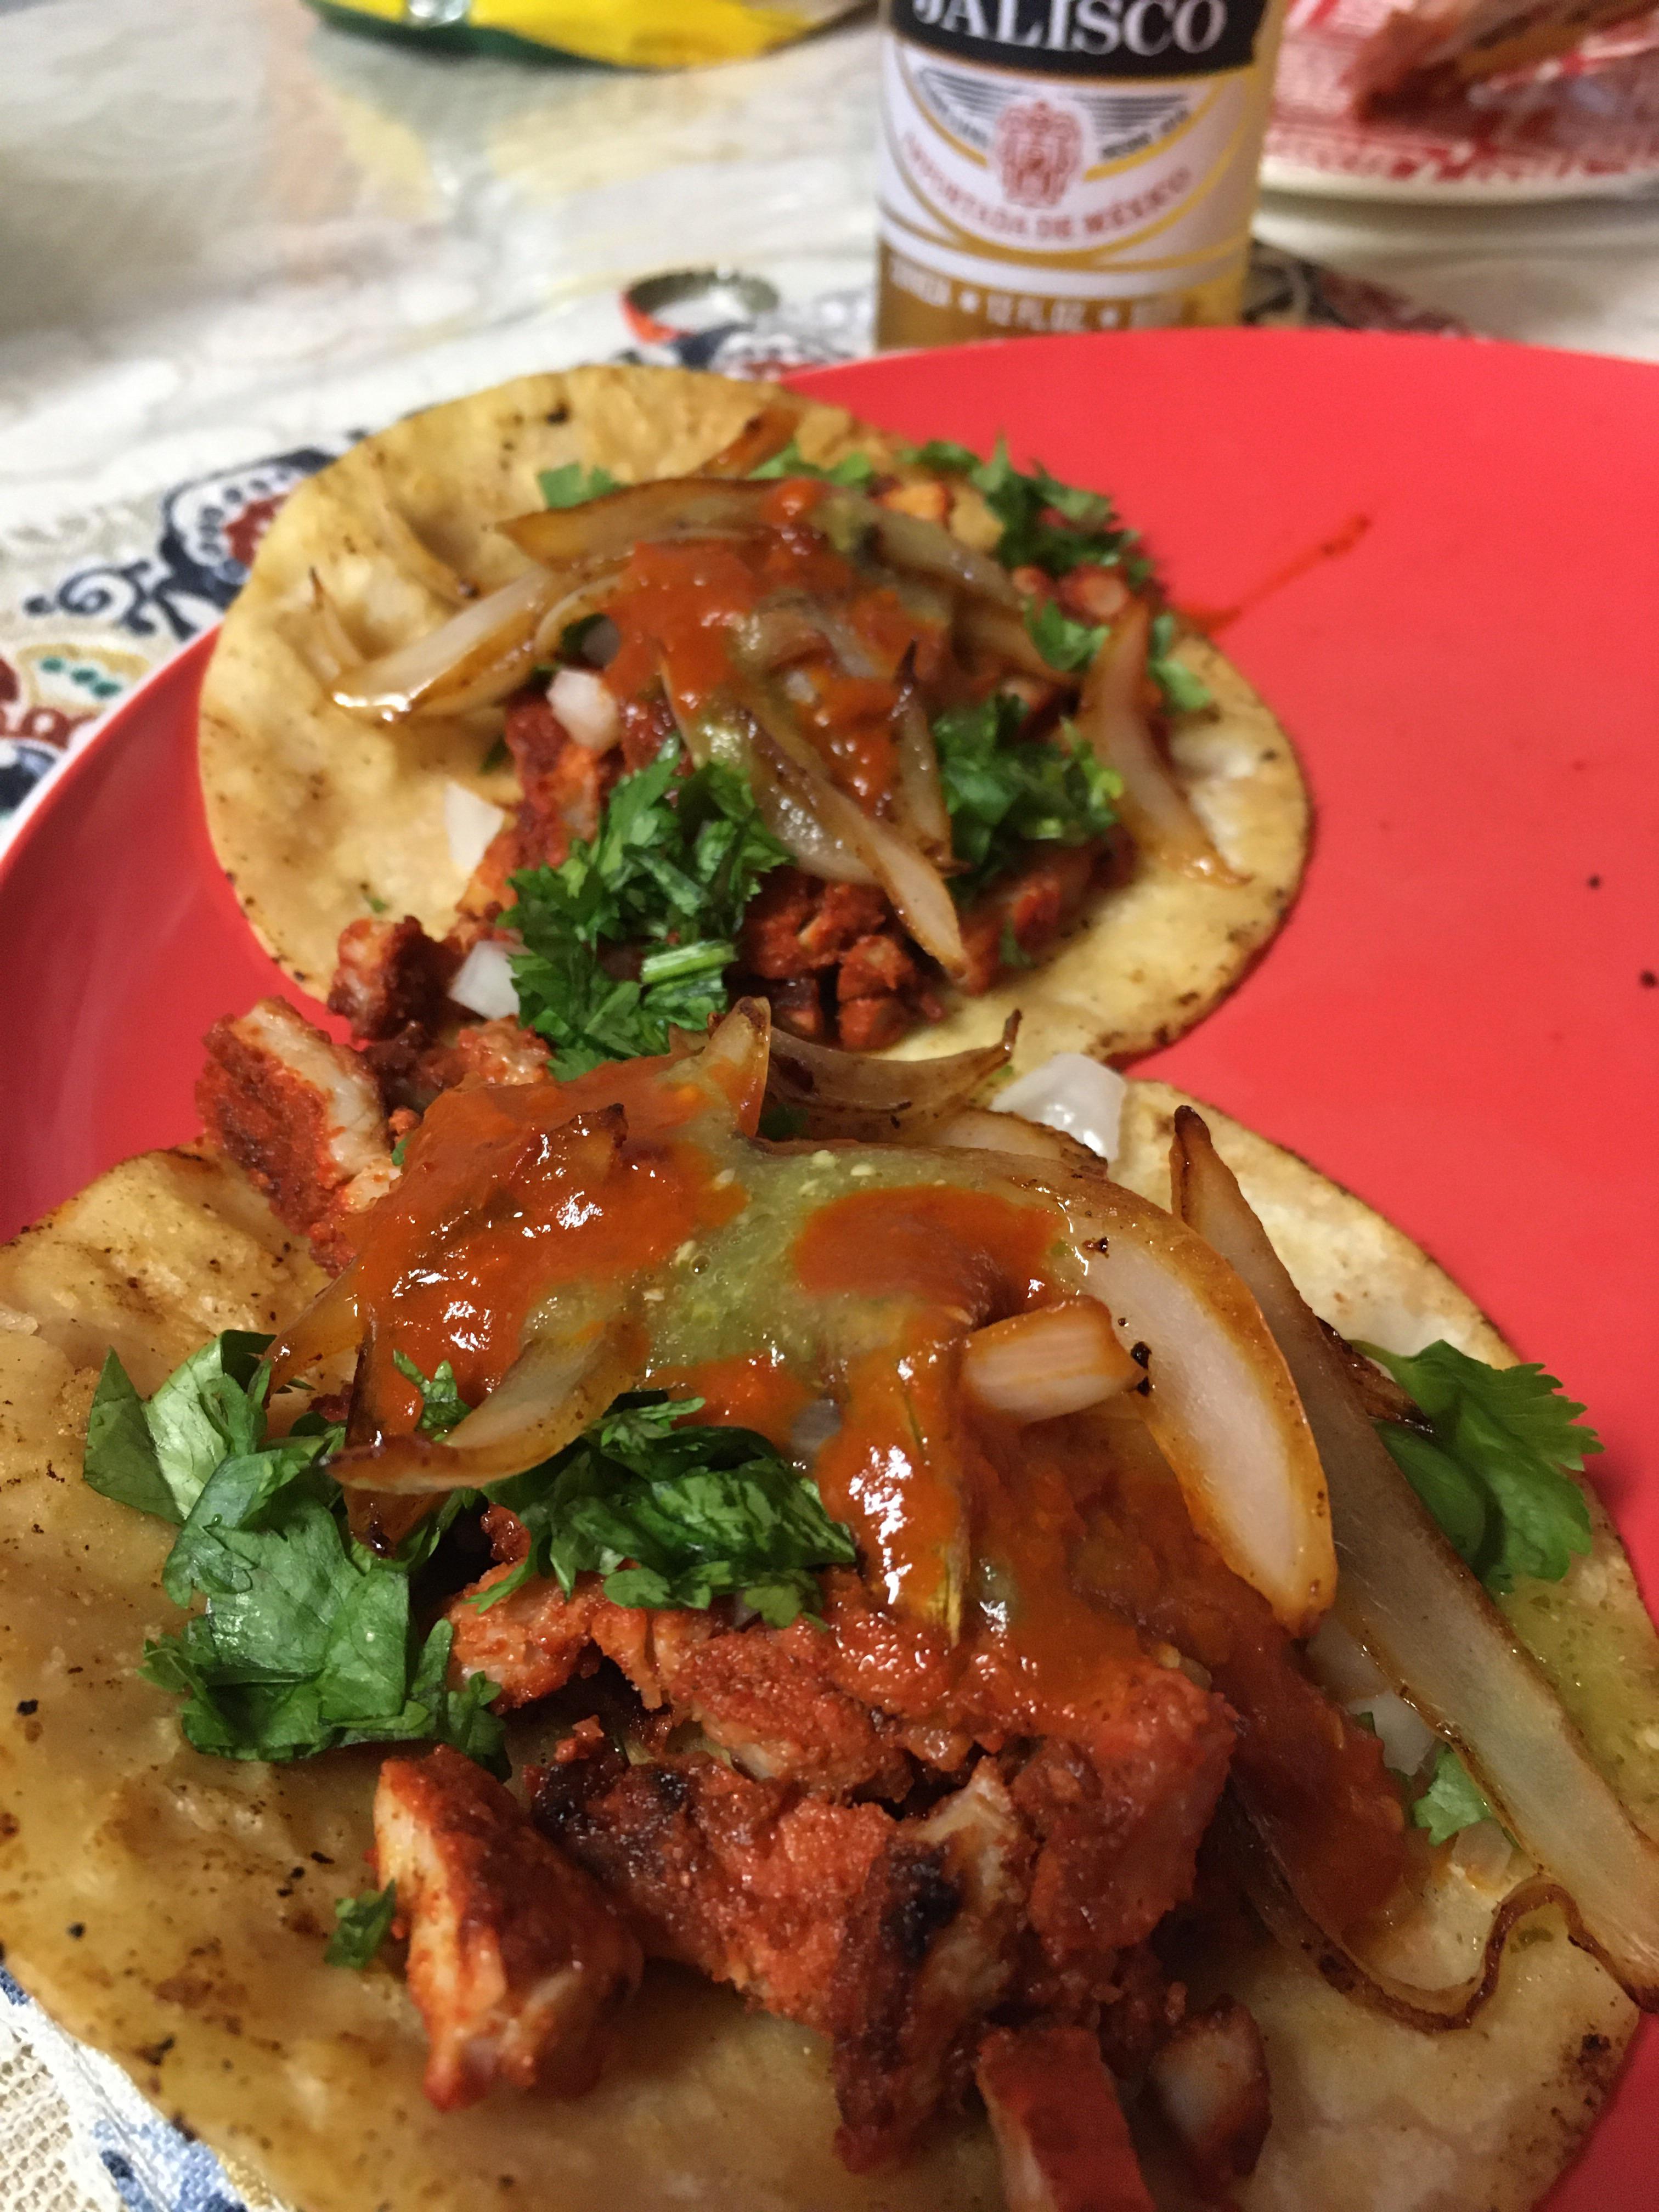 Made Some Late Night Tacos De Carne Adobada Dining And Cooking